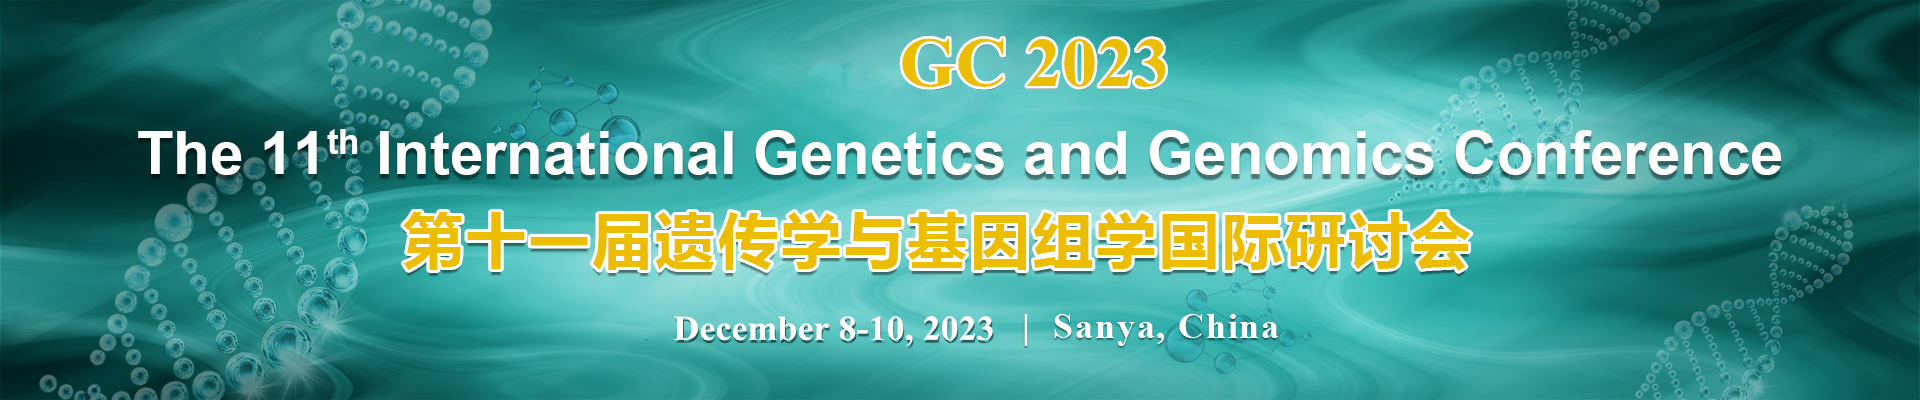 The 11th International Genetics and Genomics Conference (GC 2023)